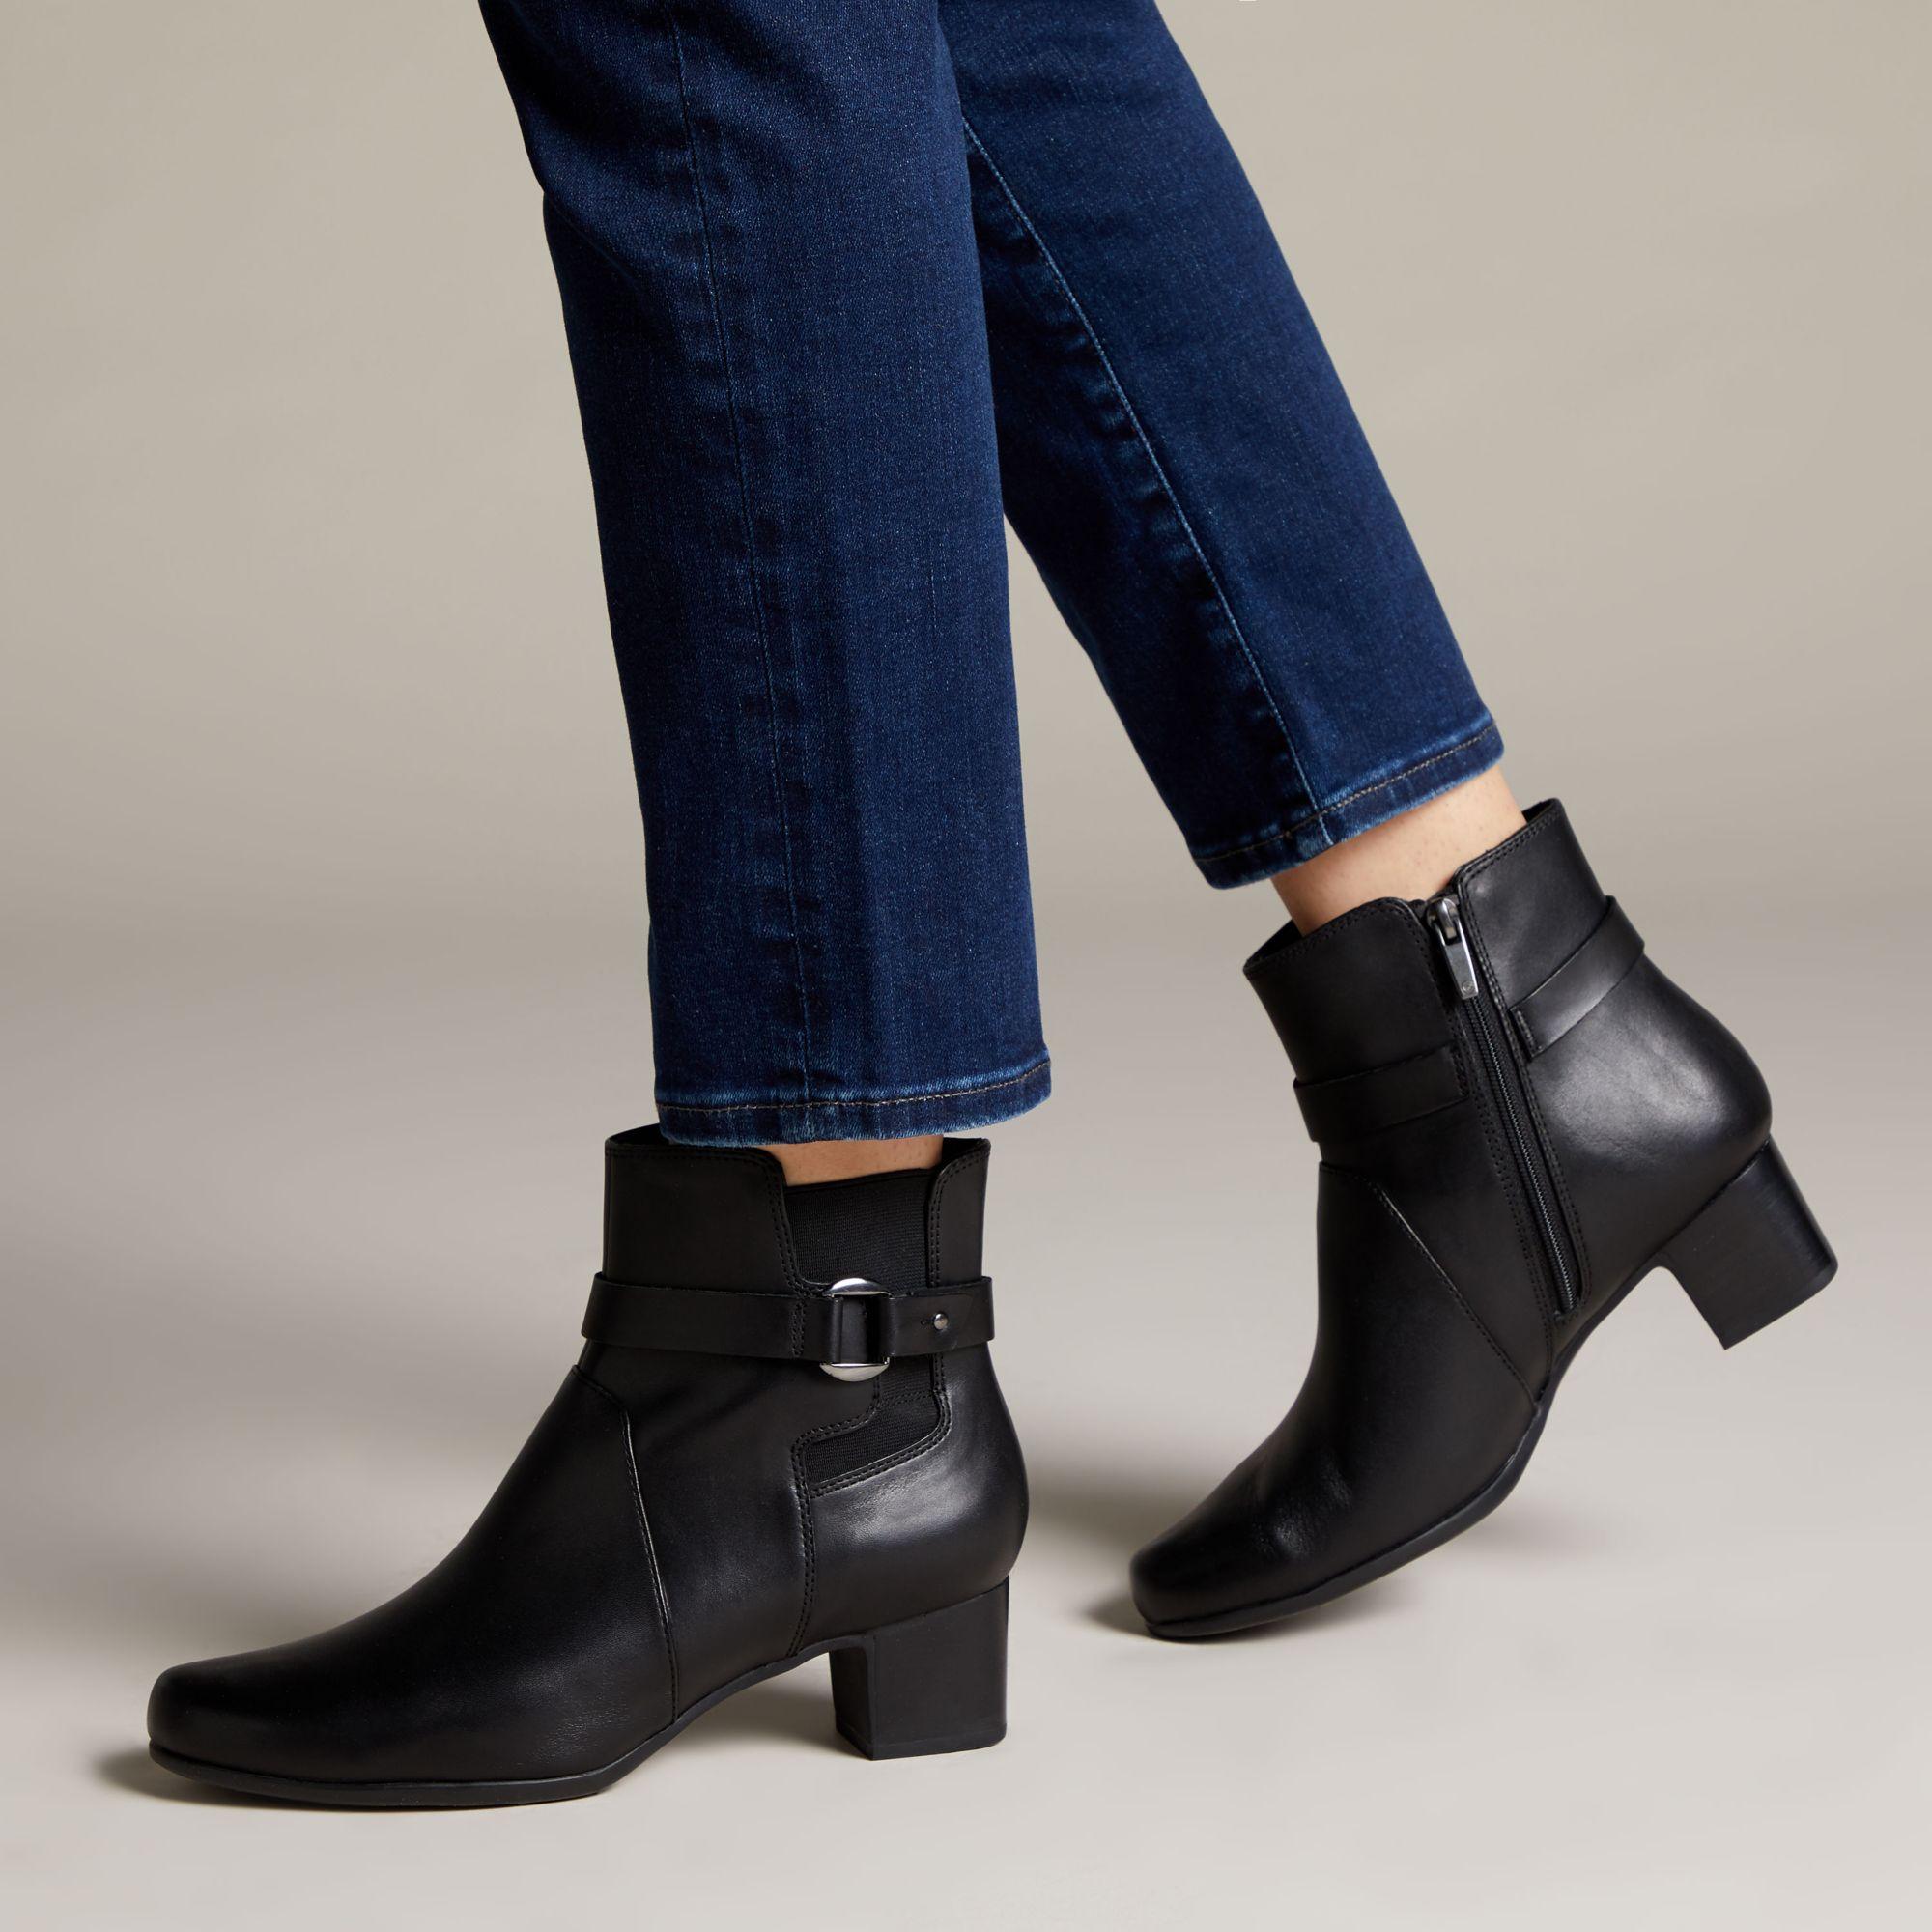 Clarks Leather Un Damson Mid in Black Leather (Black) - Lyst